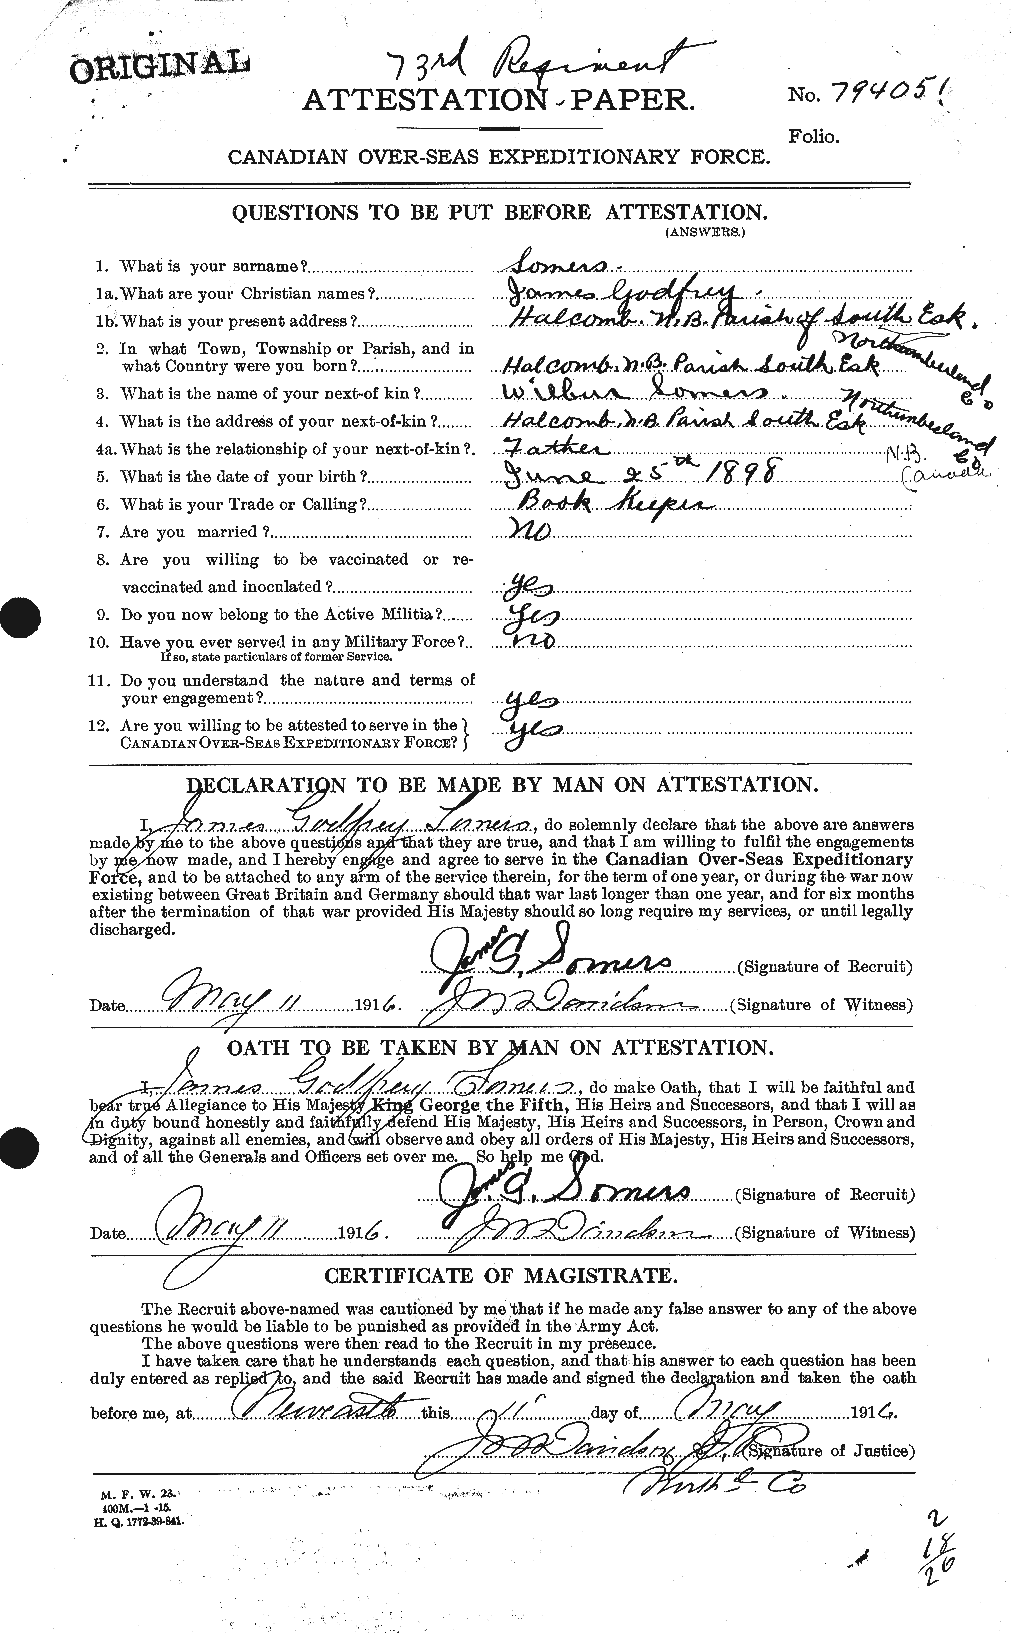 Personnel Records of the First World War - CEF 107147a